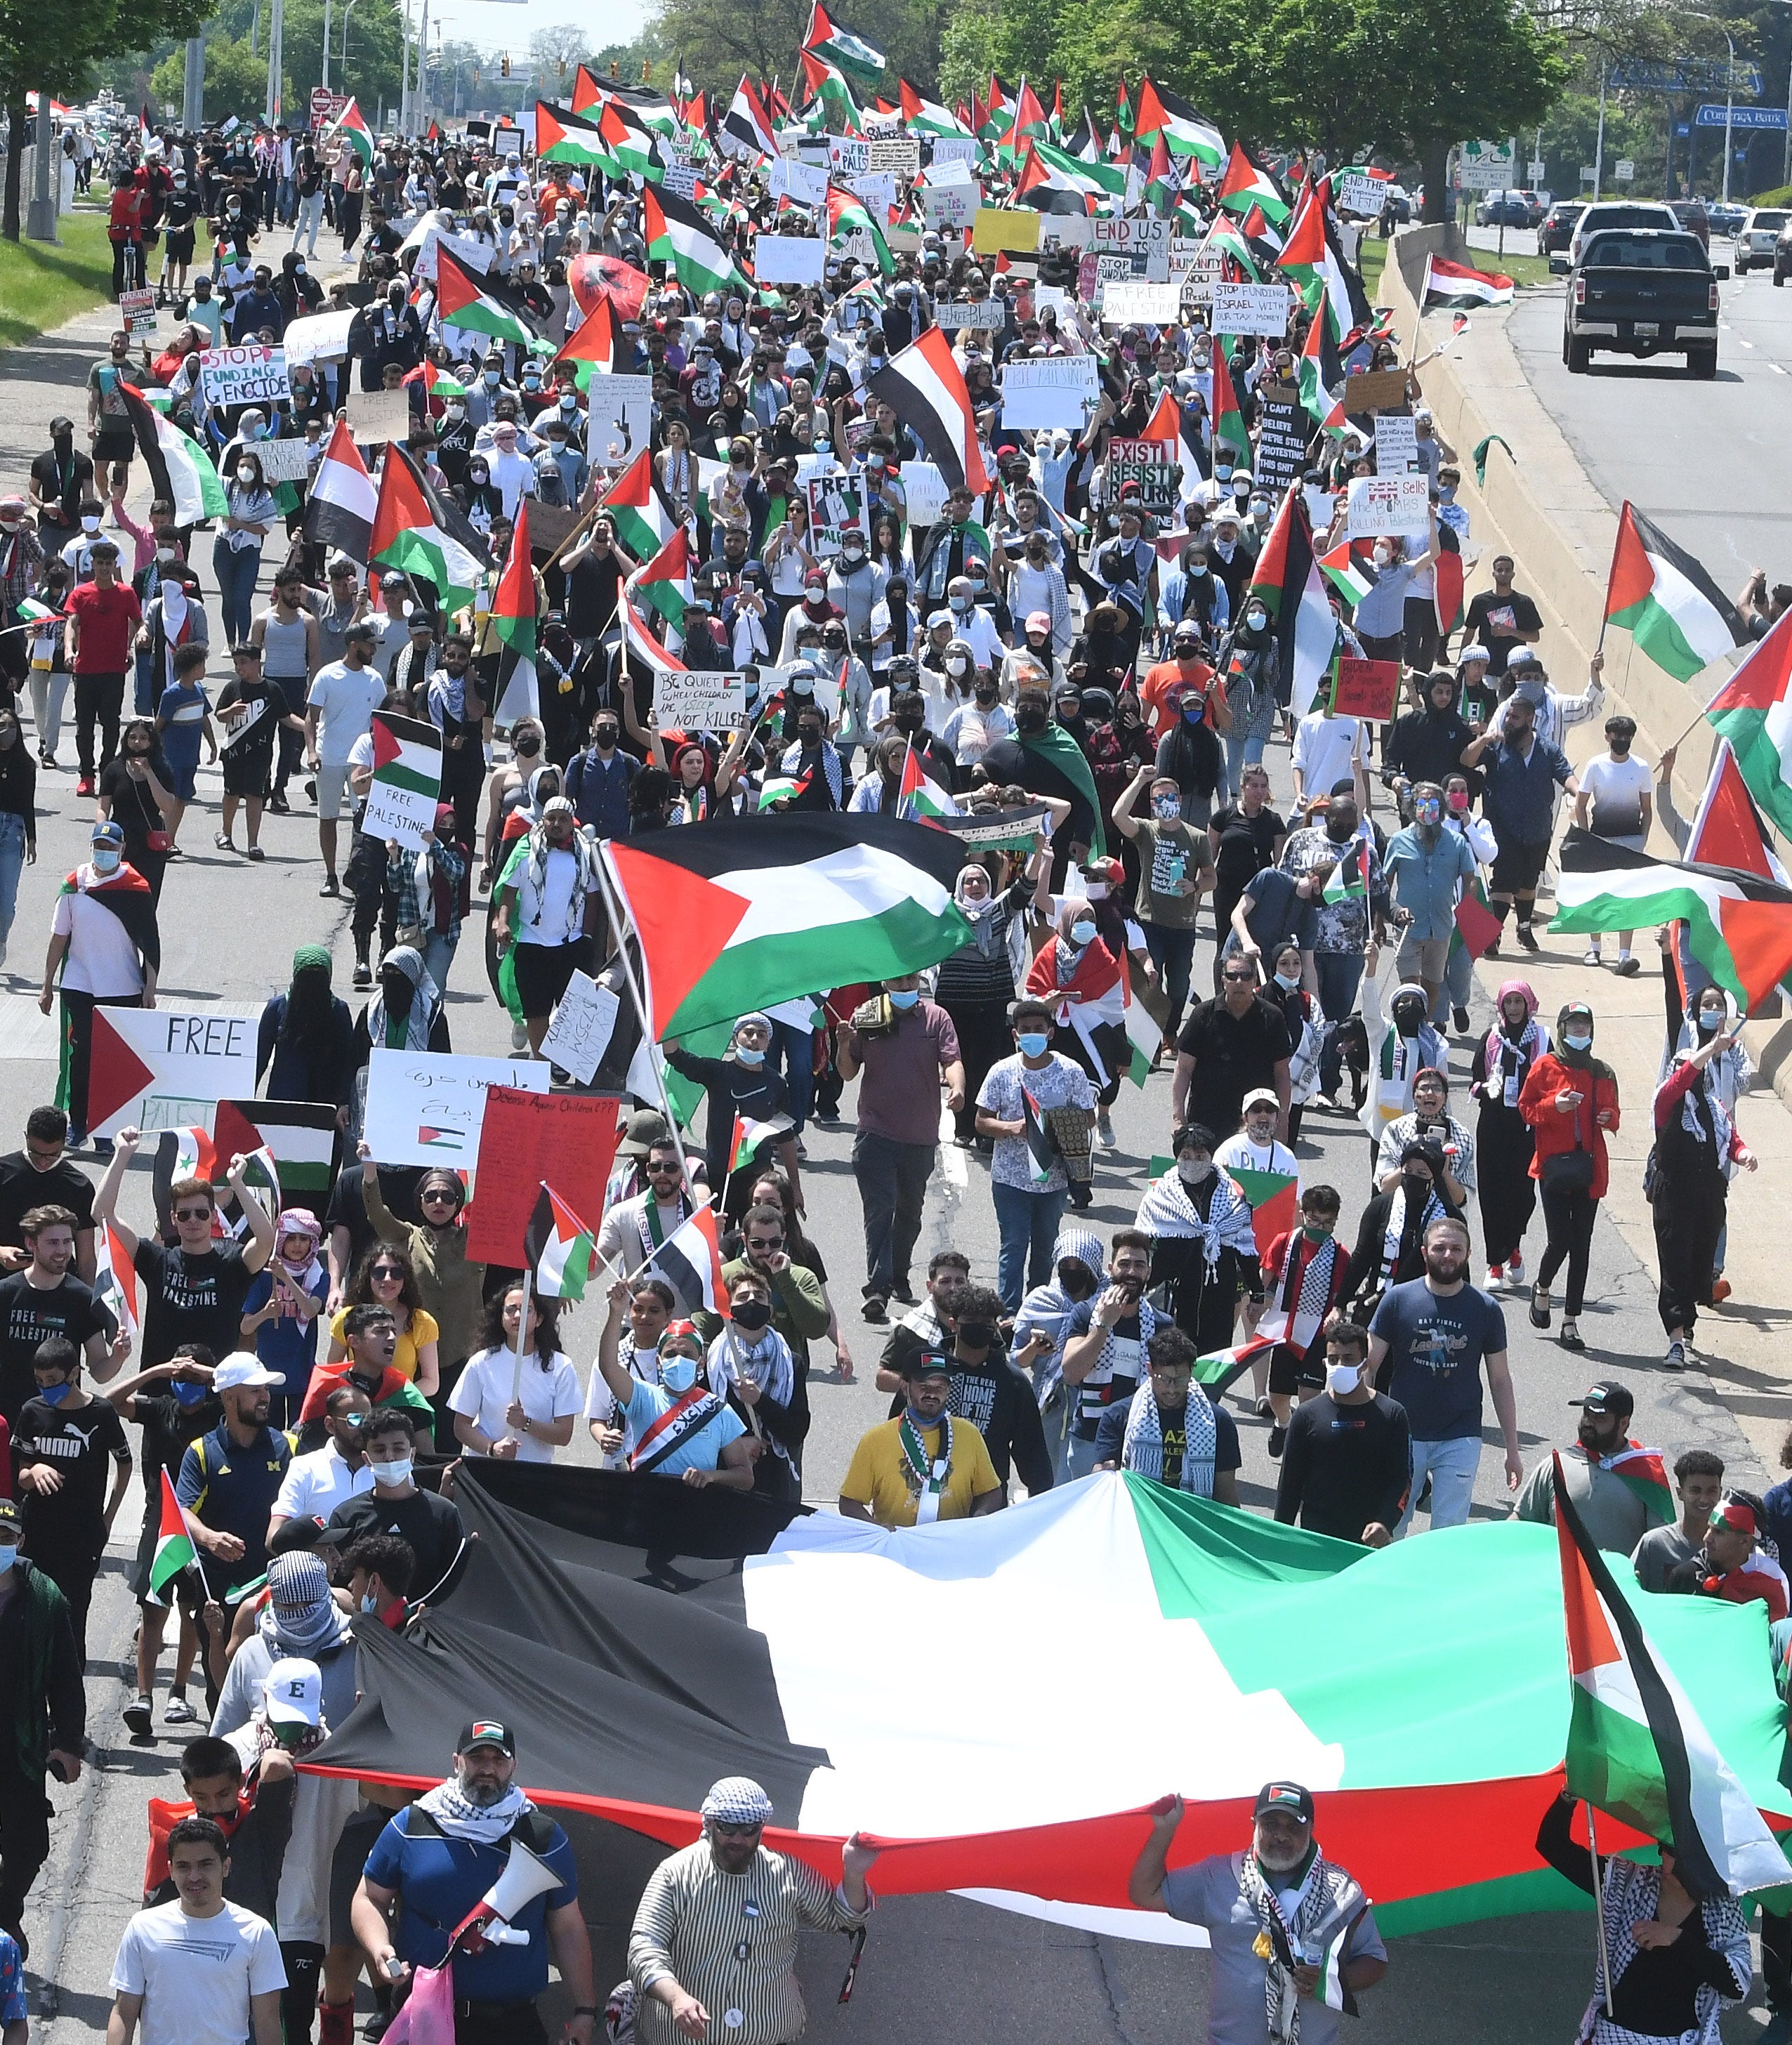 Thousands of Palestinian supporters march down eastbound Michigan Avenue during a Palestinian protest and march, at the same time President Joe Biden is visiting in another part of Dearborn, Michigan on May 18, 2021.